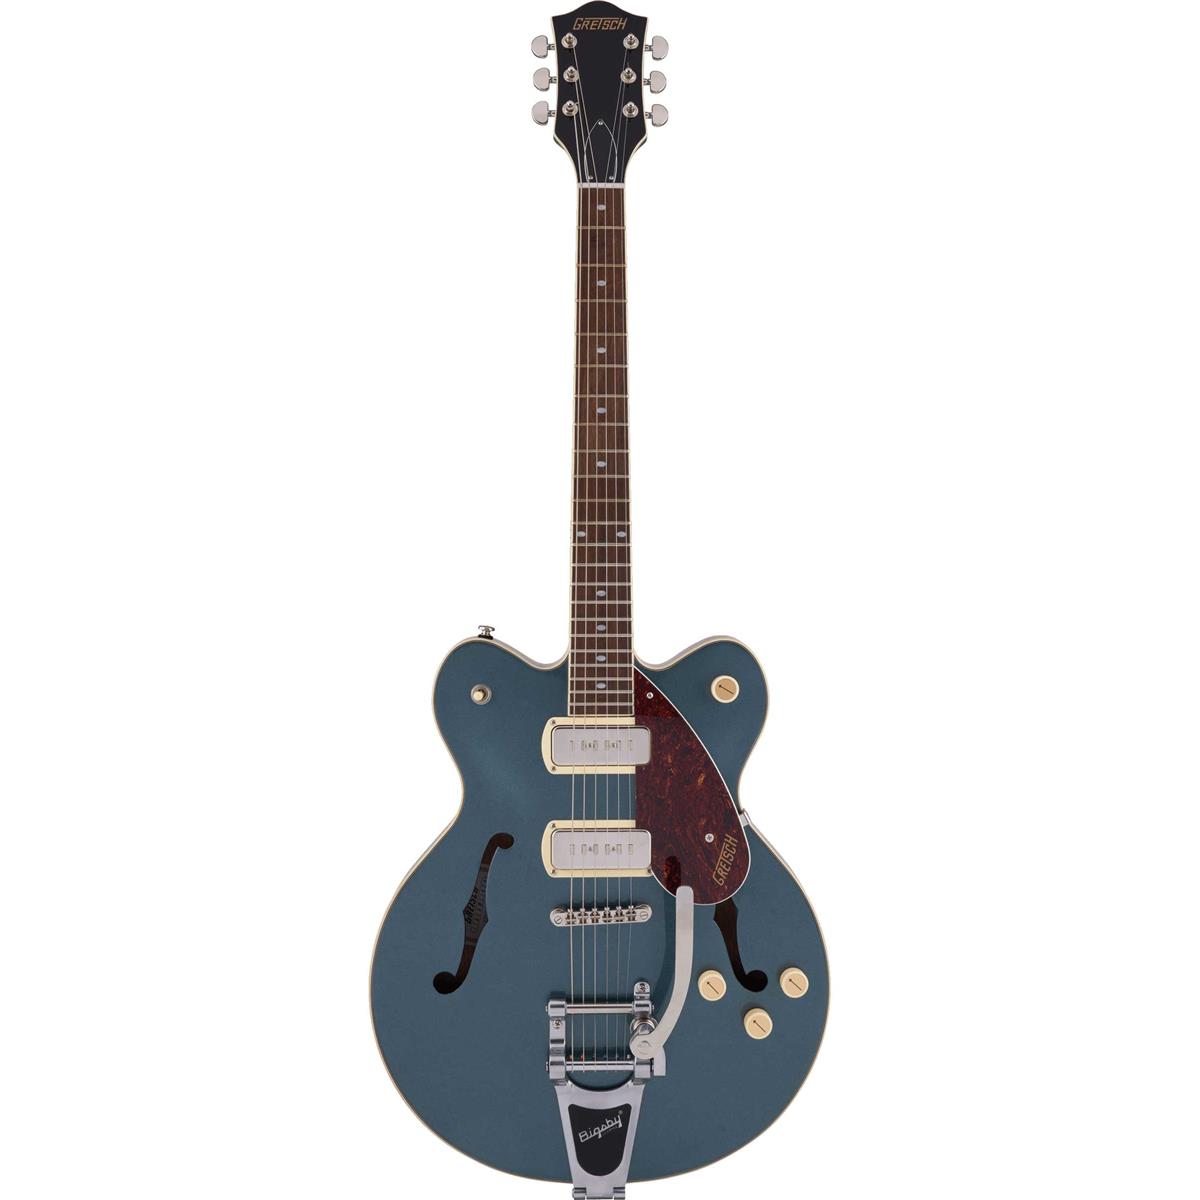 Gretsch G2622T-P90 Streamliner Collection Center Block Double-Cut P90 Electric Guitar with Bigsby $299 + free s/h